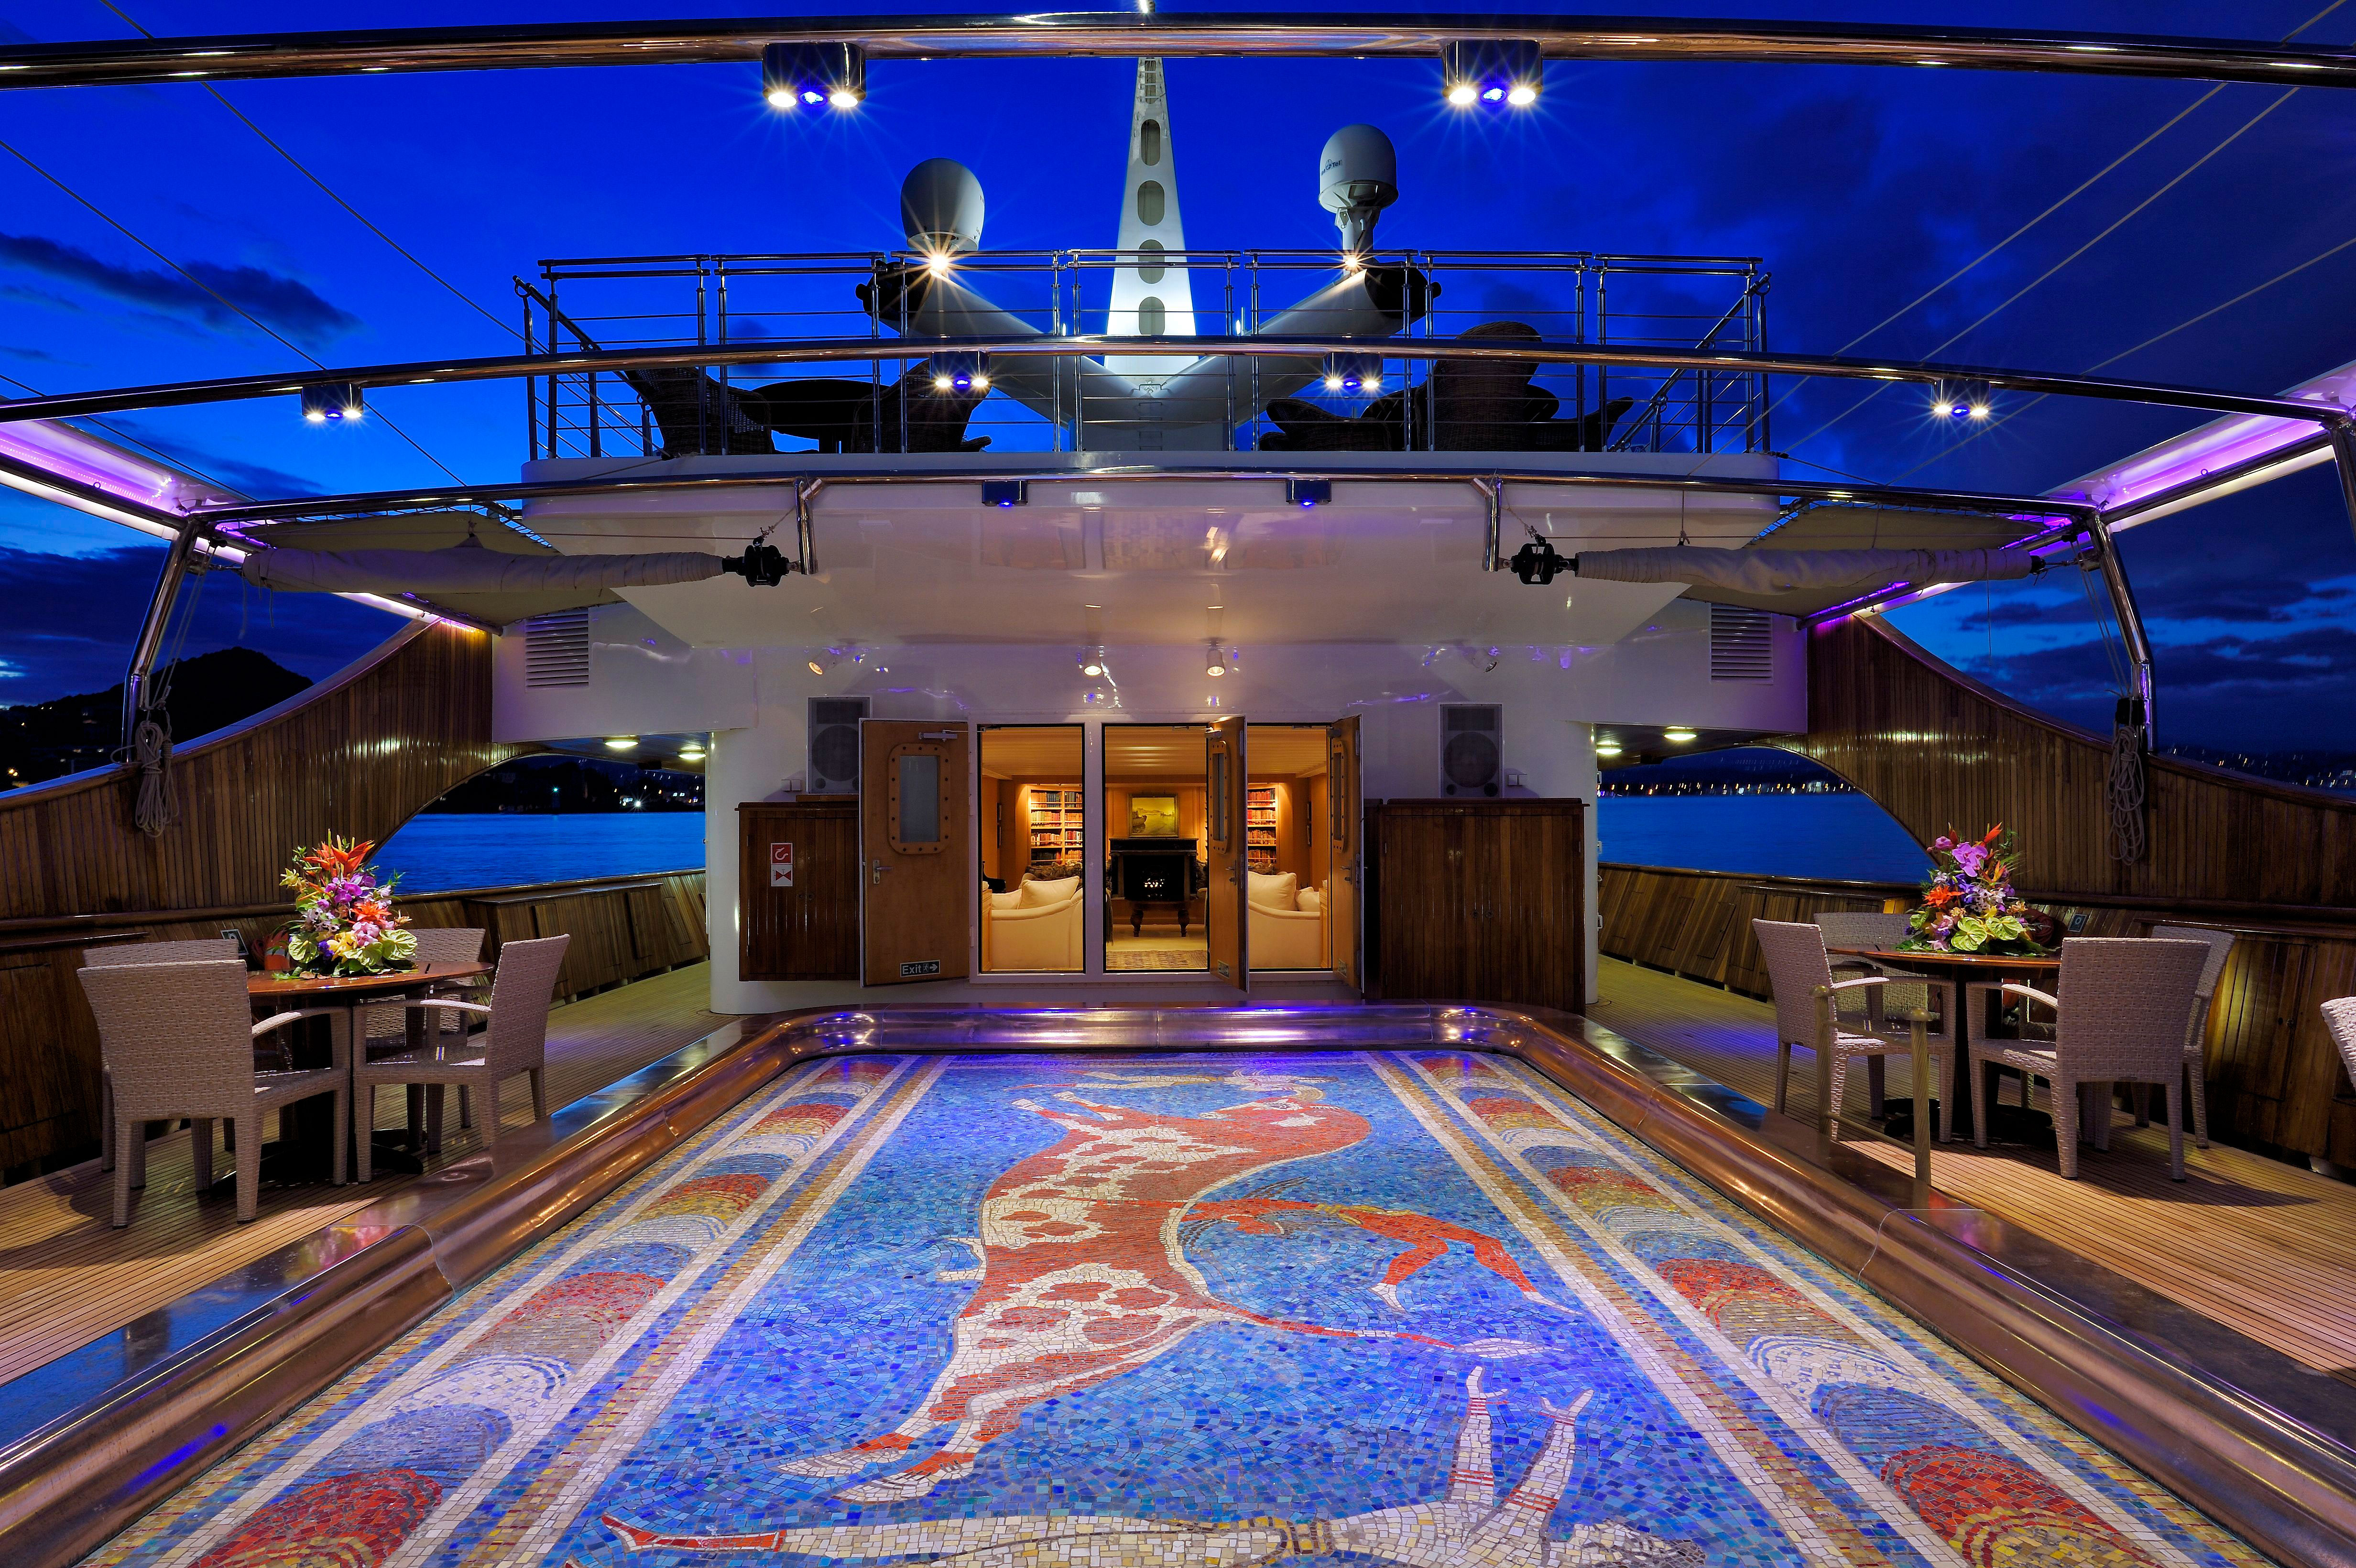 Deck and floor mosaic view of the Christina O Yacht where the Triangle of Sadness movie was filmed.